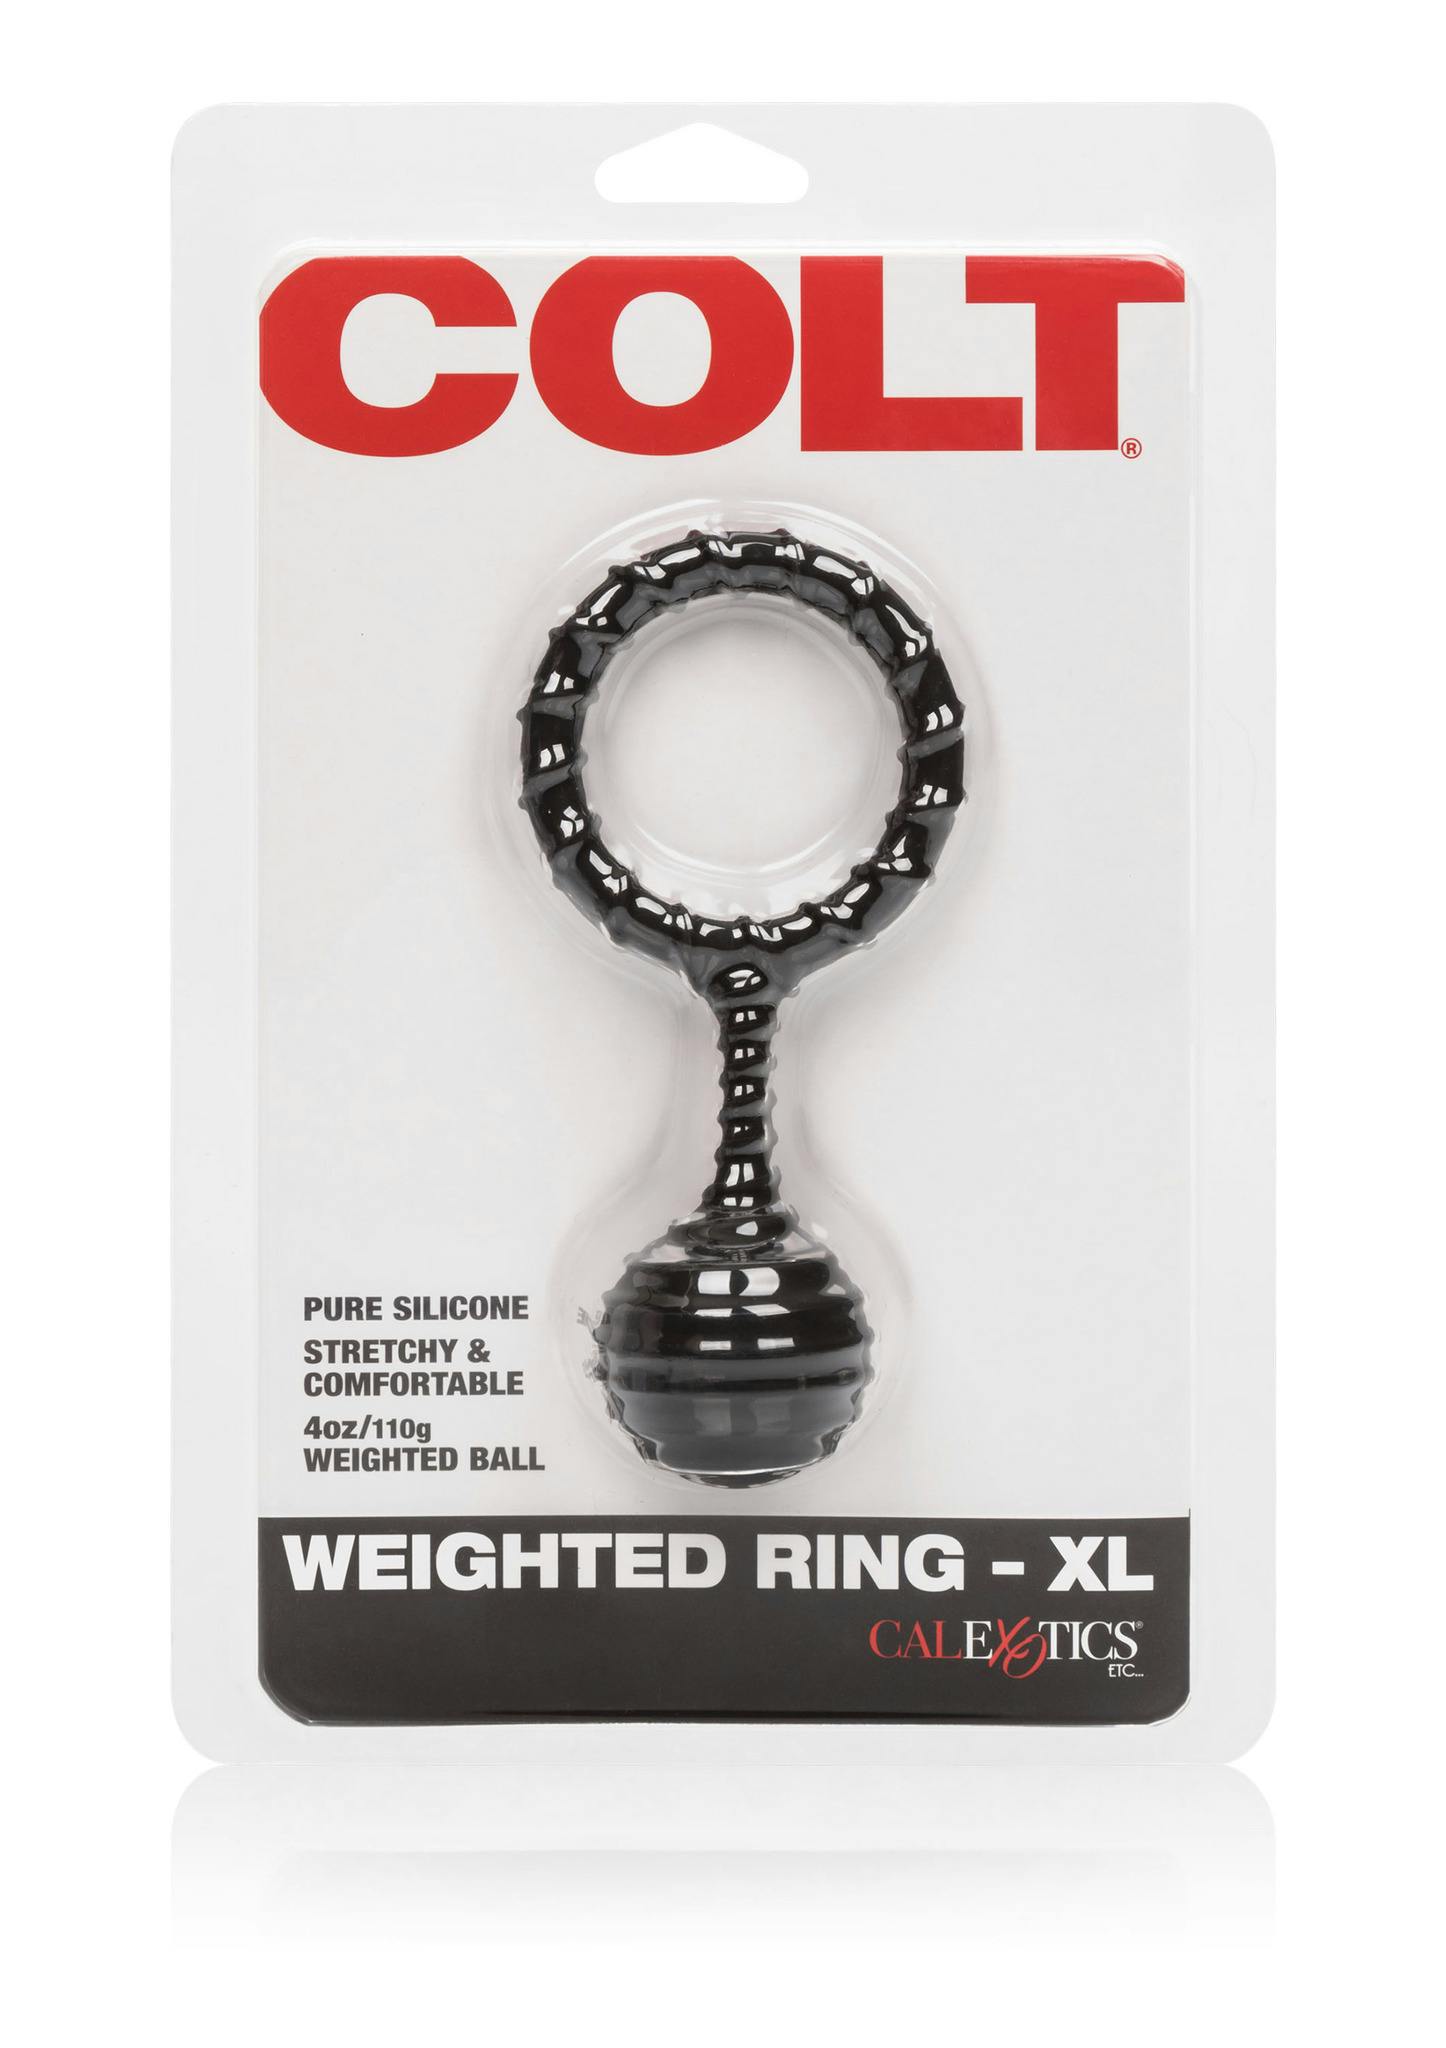 COLT - Weighted Ring, XL